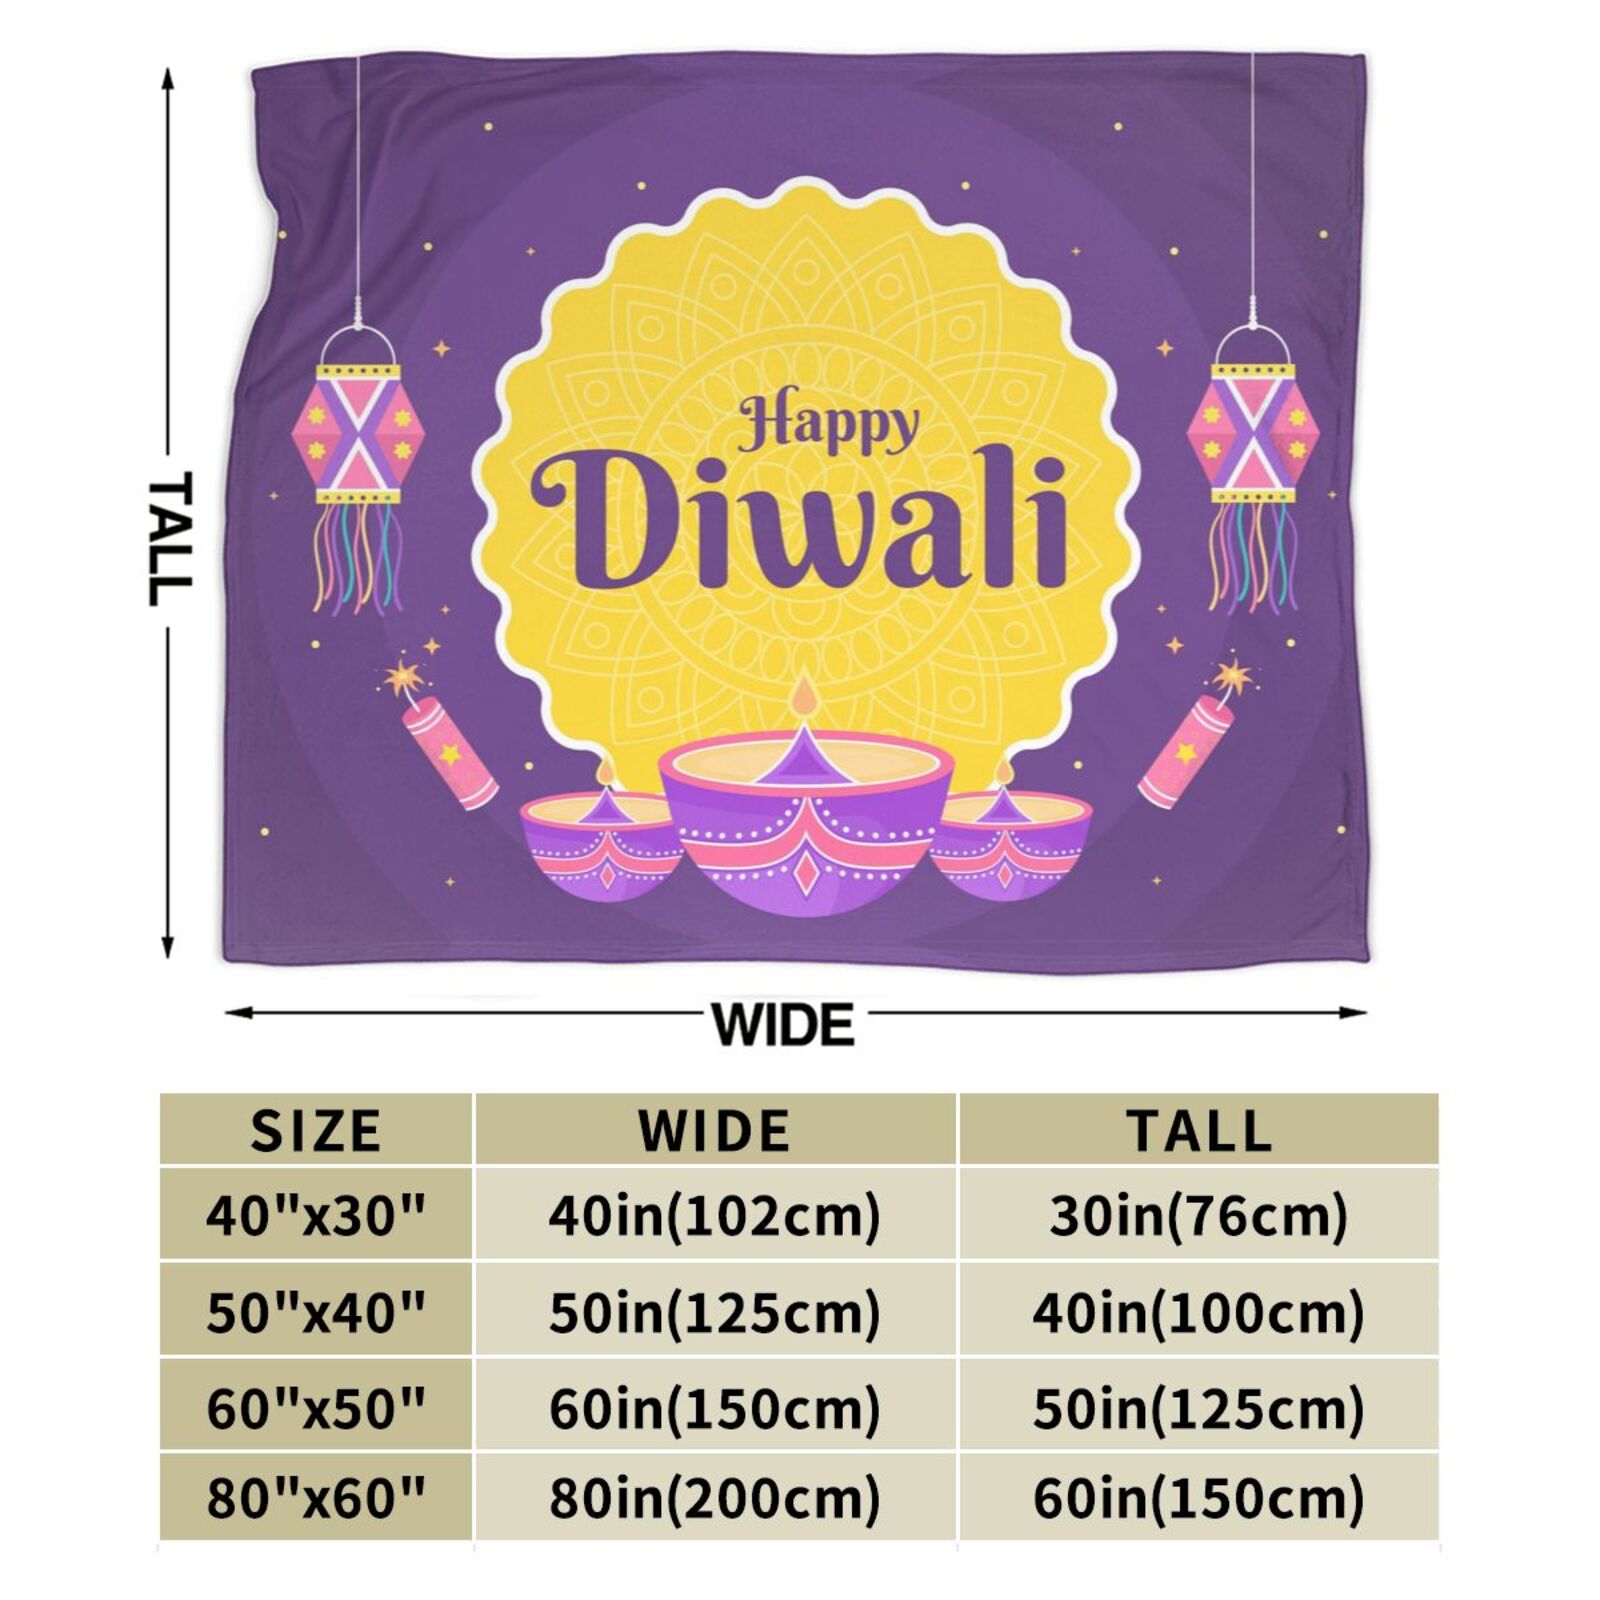 Happy Diwali Ultra Soft Air Conditioning Blanket Comfortable Warm Micro ...